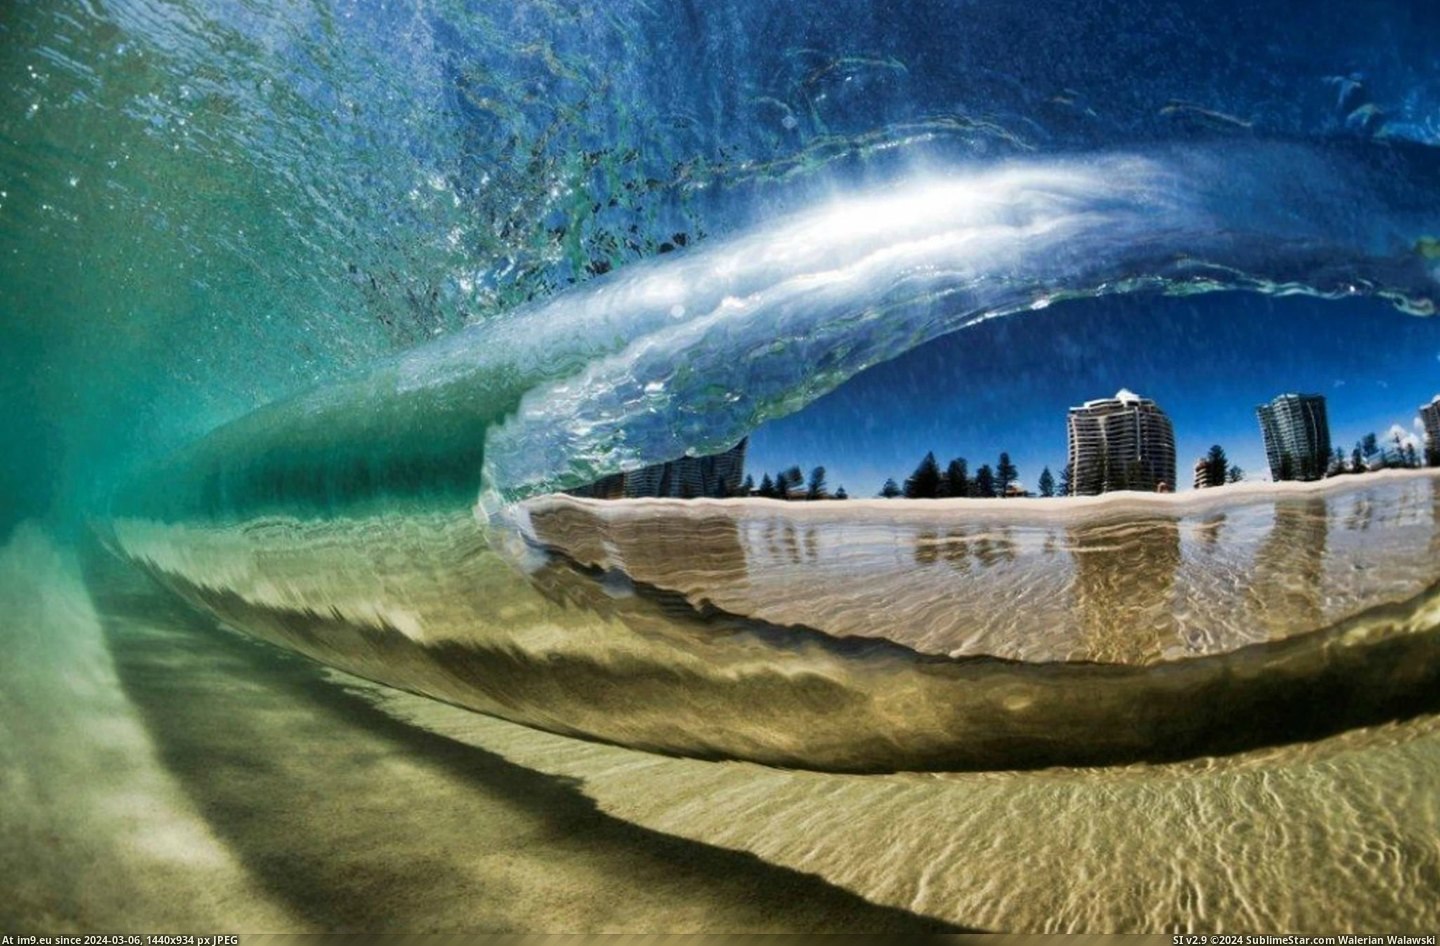  #Wave  [Pics] A view from under the wave. Pic. (Image of album My r/PICS favs))